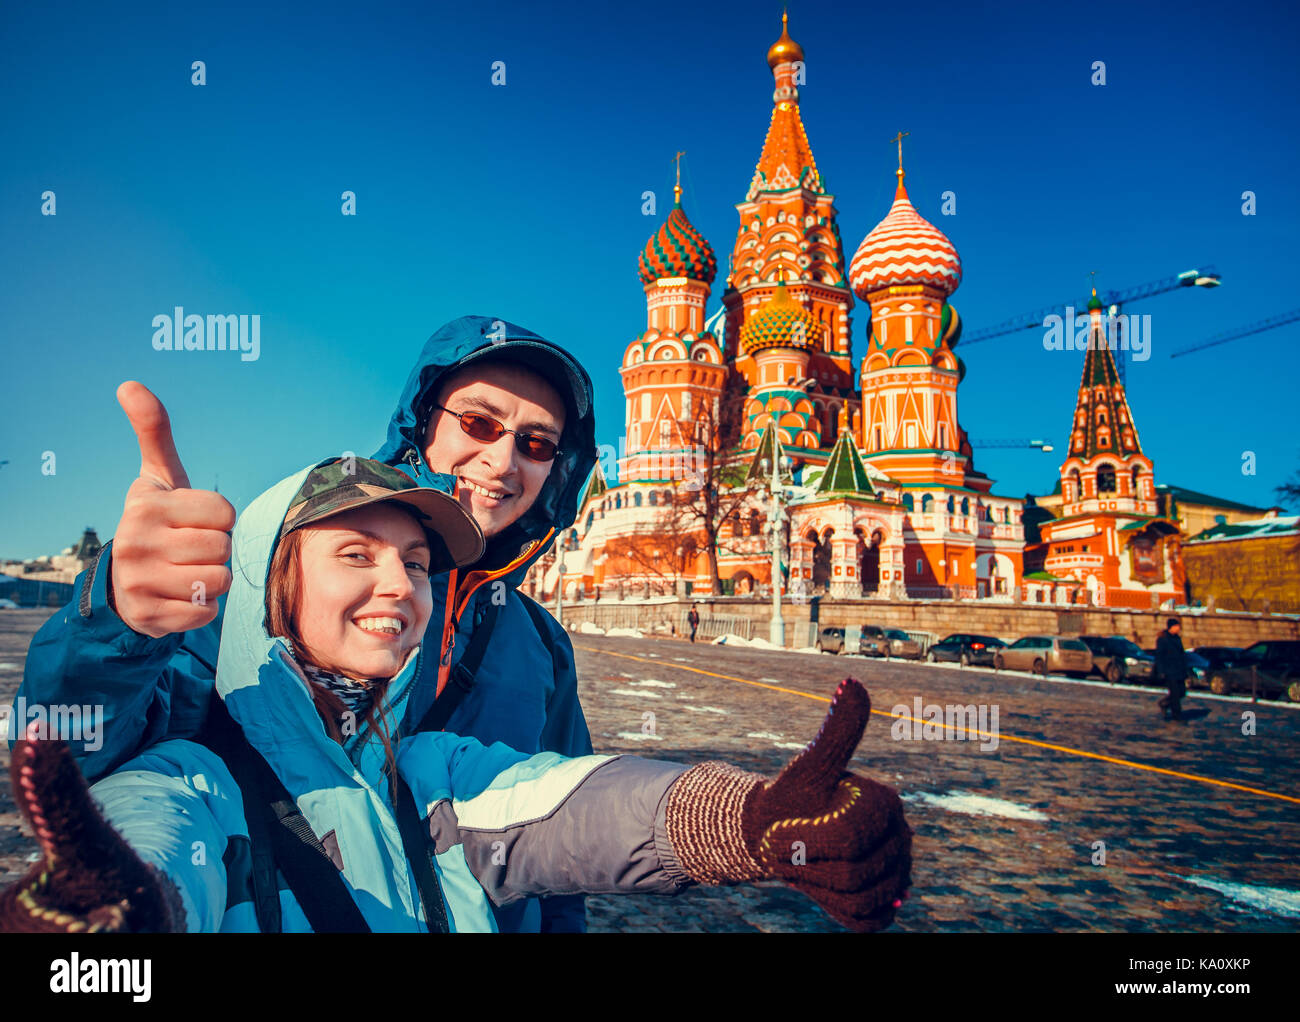 Happy tourists on Red Square, Moscow, Russia Stock Photo